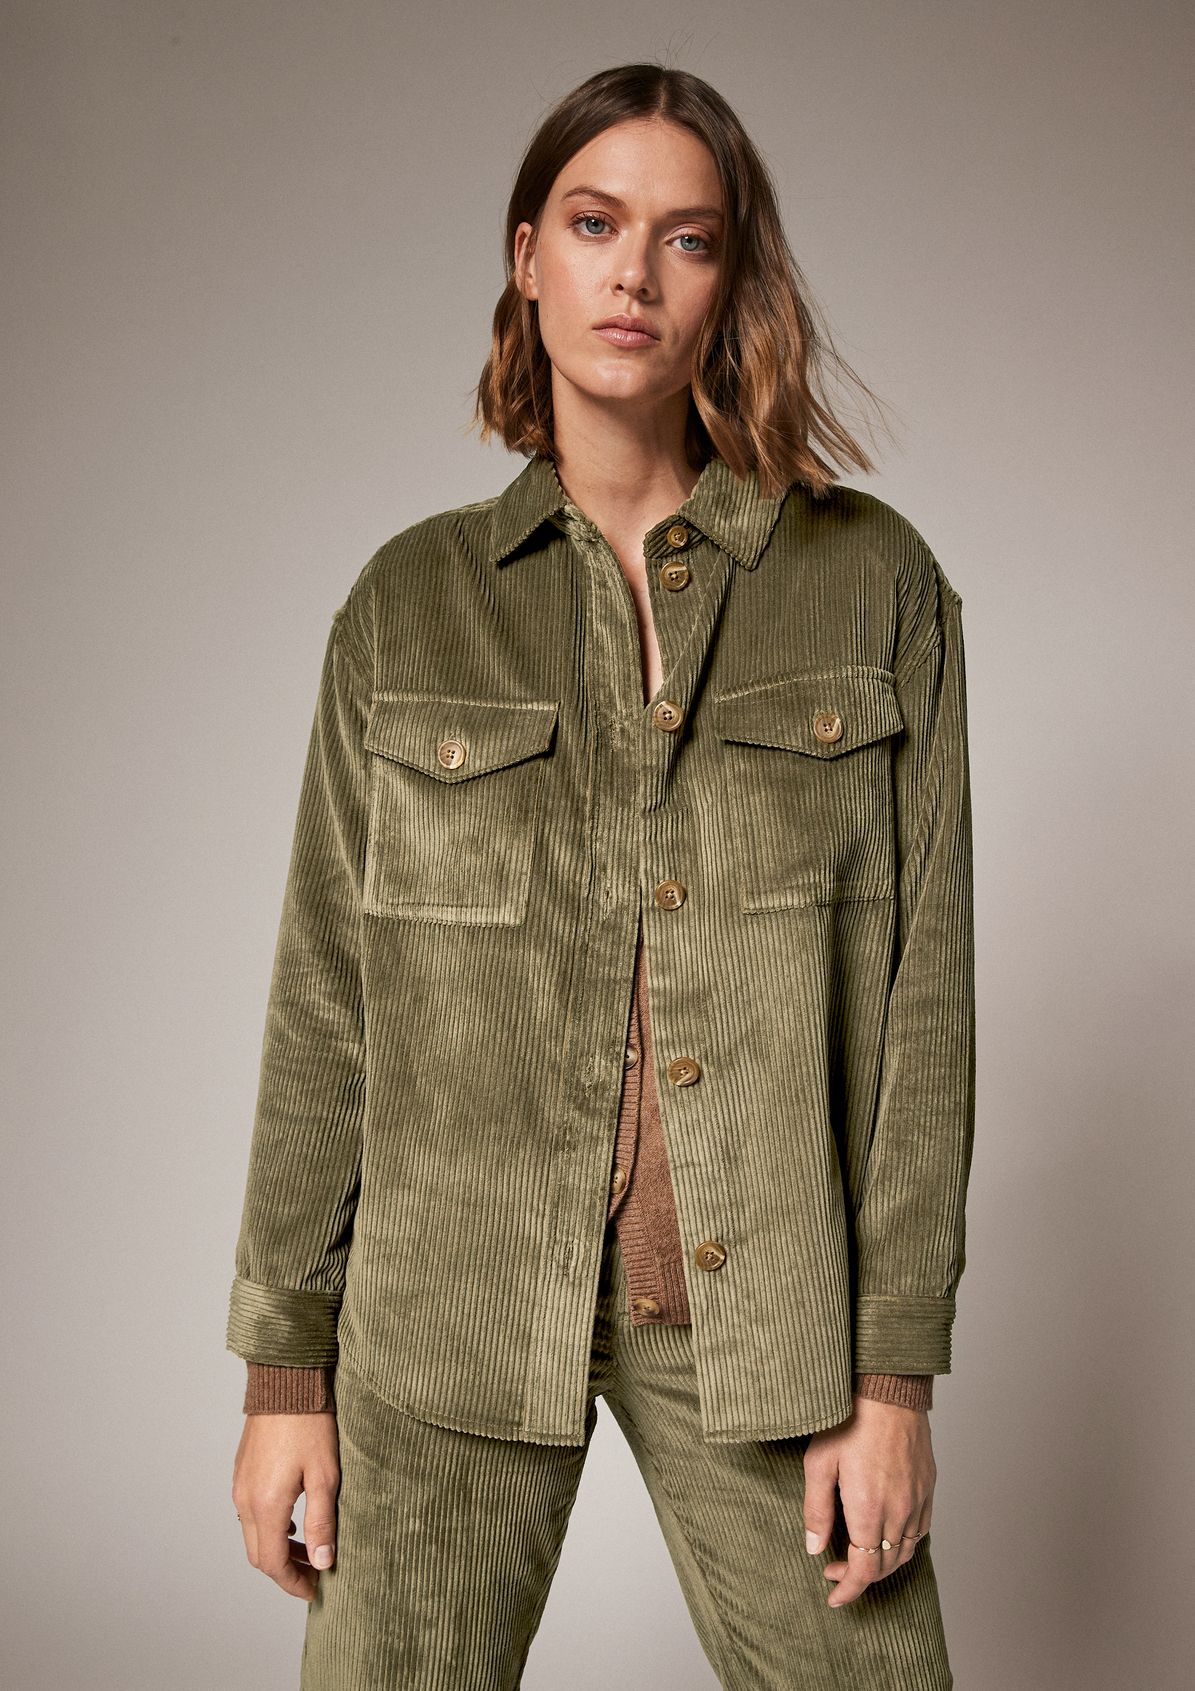 Overshirt made of corduroy from comma